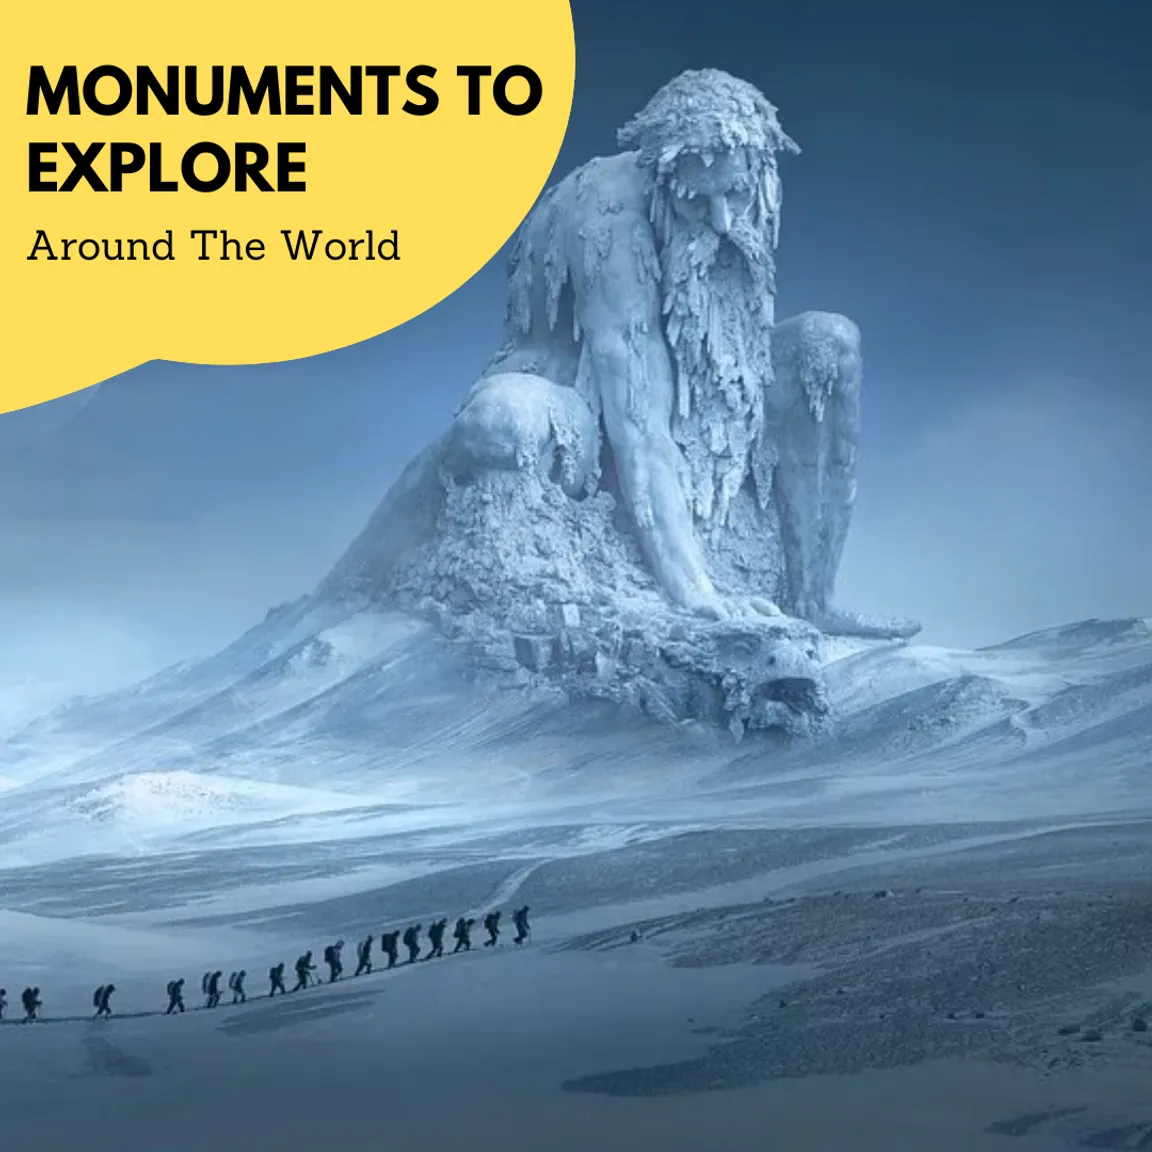 10 Most Exciting Monuments To Explore Around The World